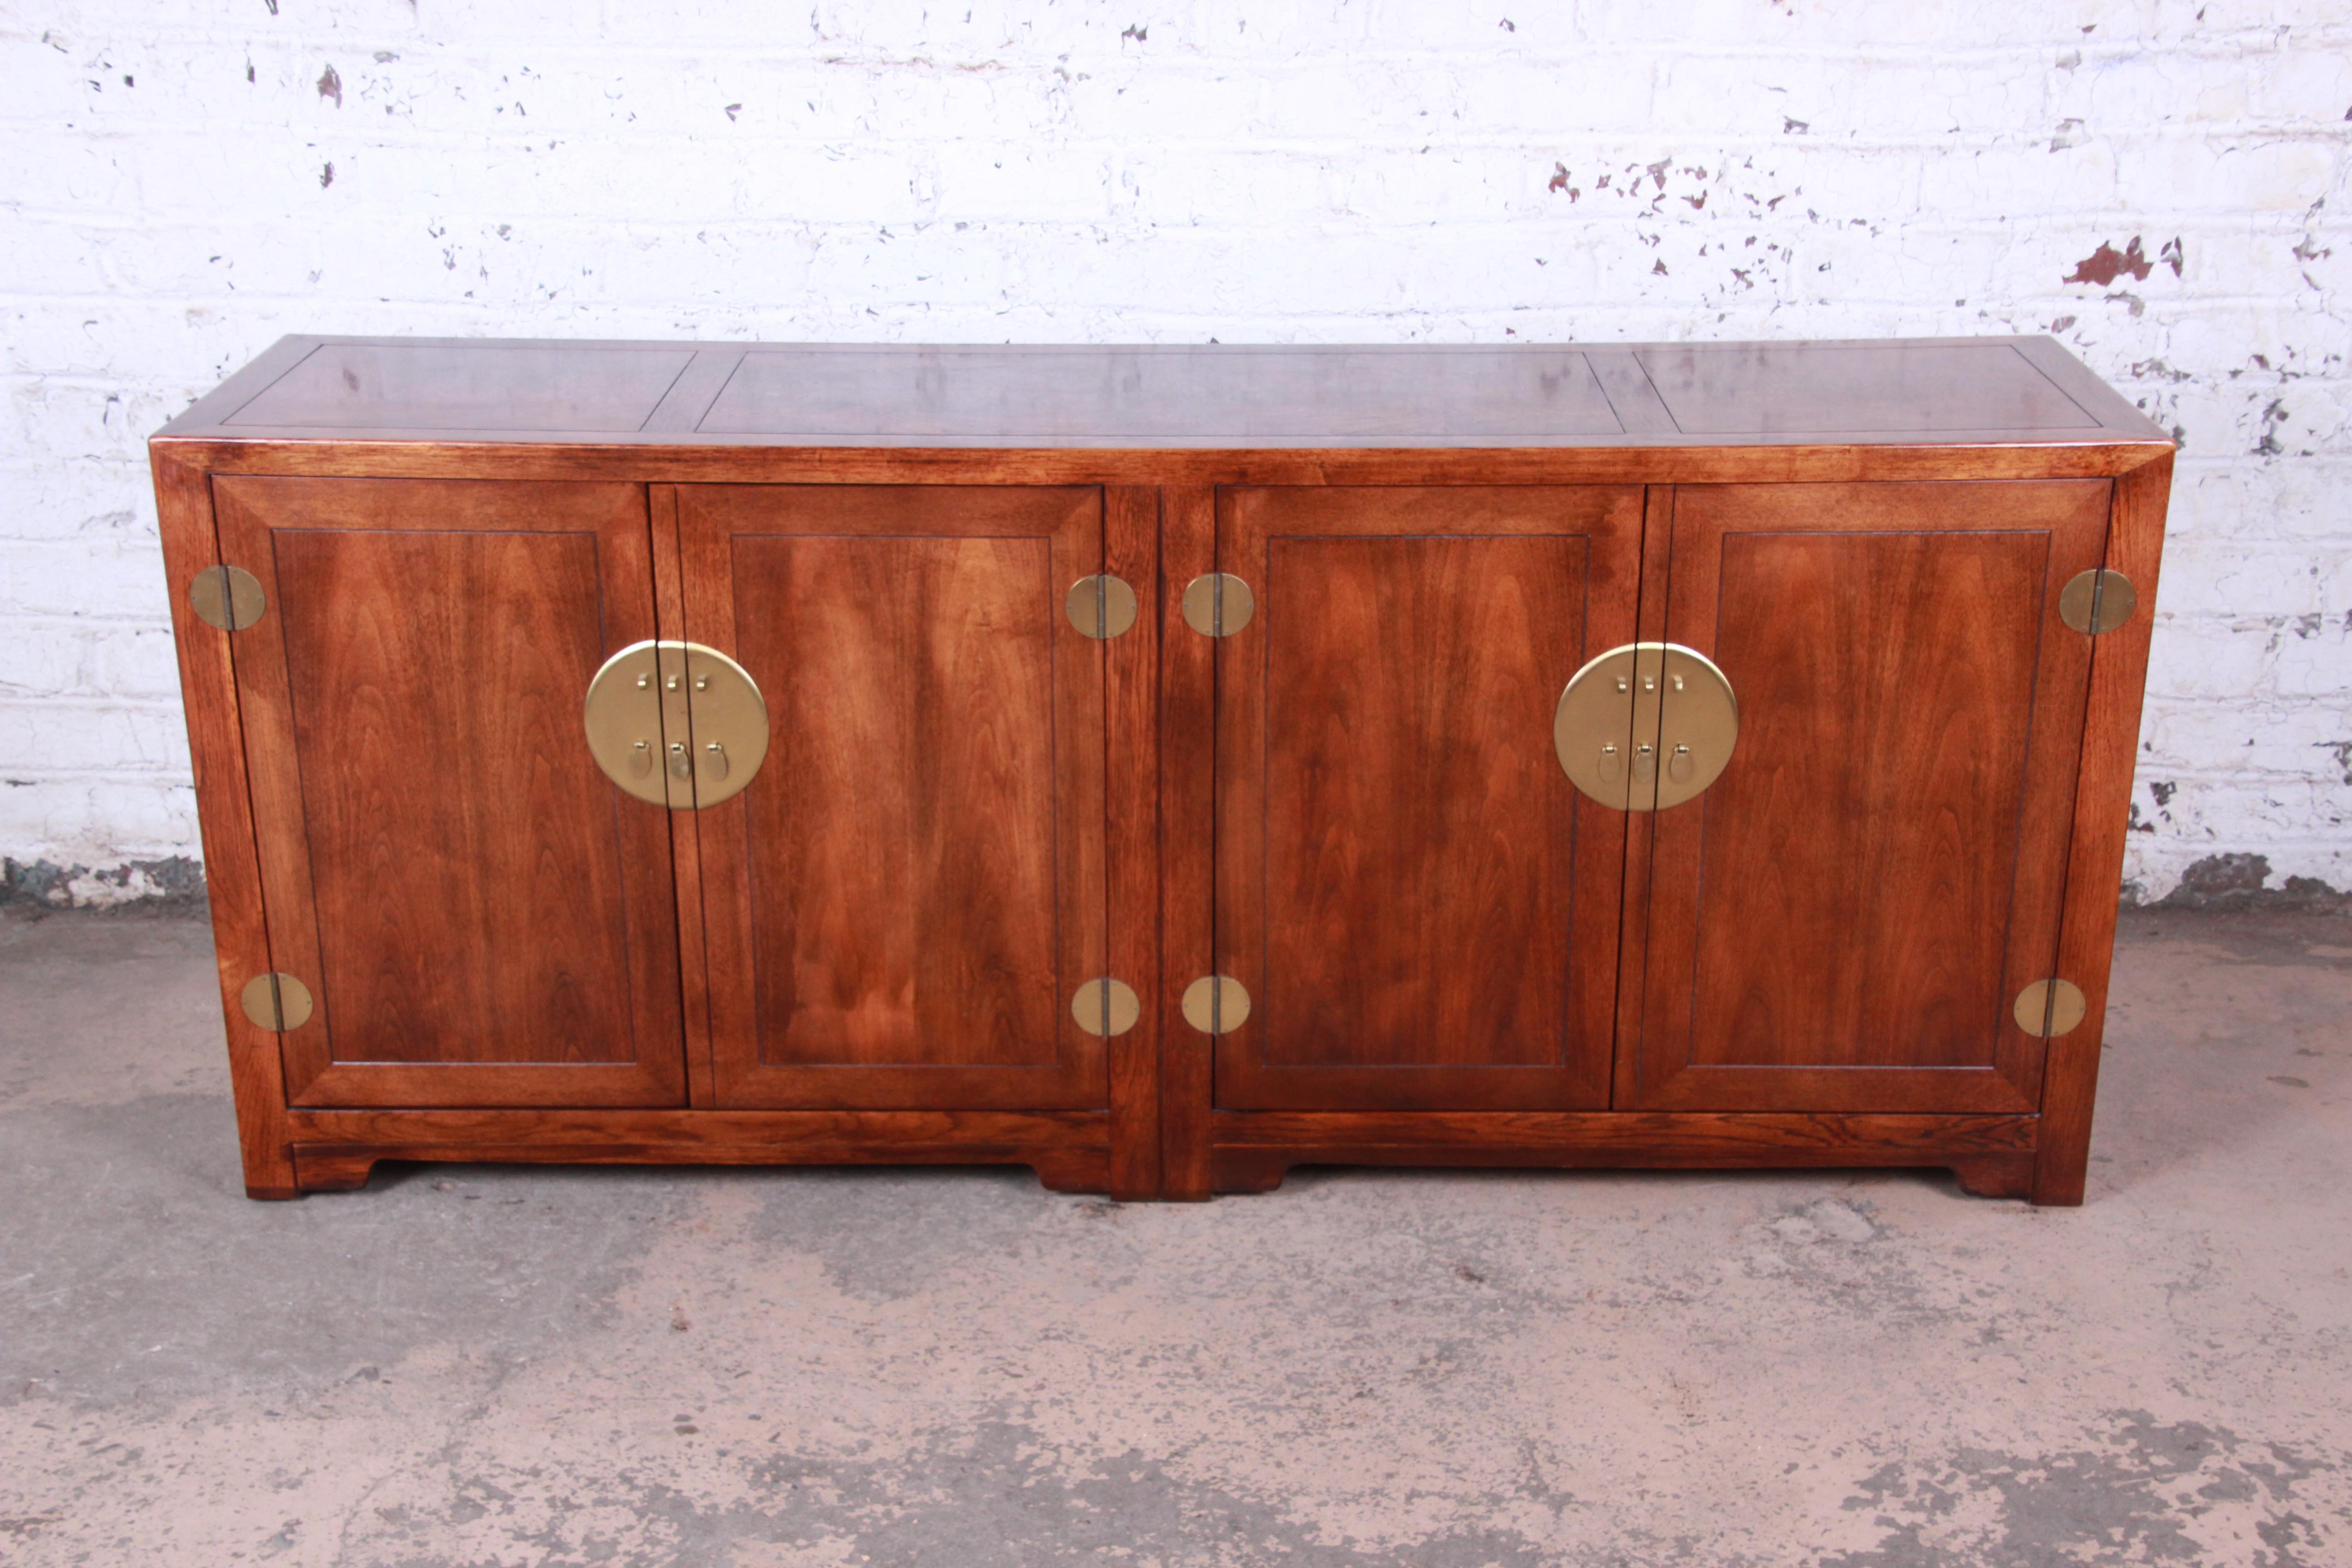 Offering an exceptional Hollywood Regency chinoiserie sideboard credenza designed by Michael Taylor for his Far East Collection for Baker Furniture. The sideboard features gorgeous walnut and burl wood grain and original brass Asian-inspired